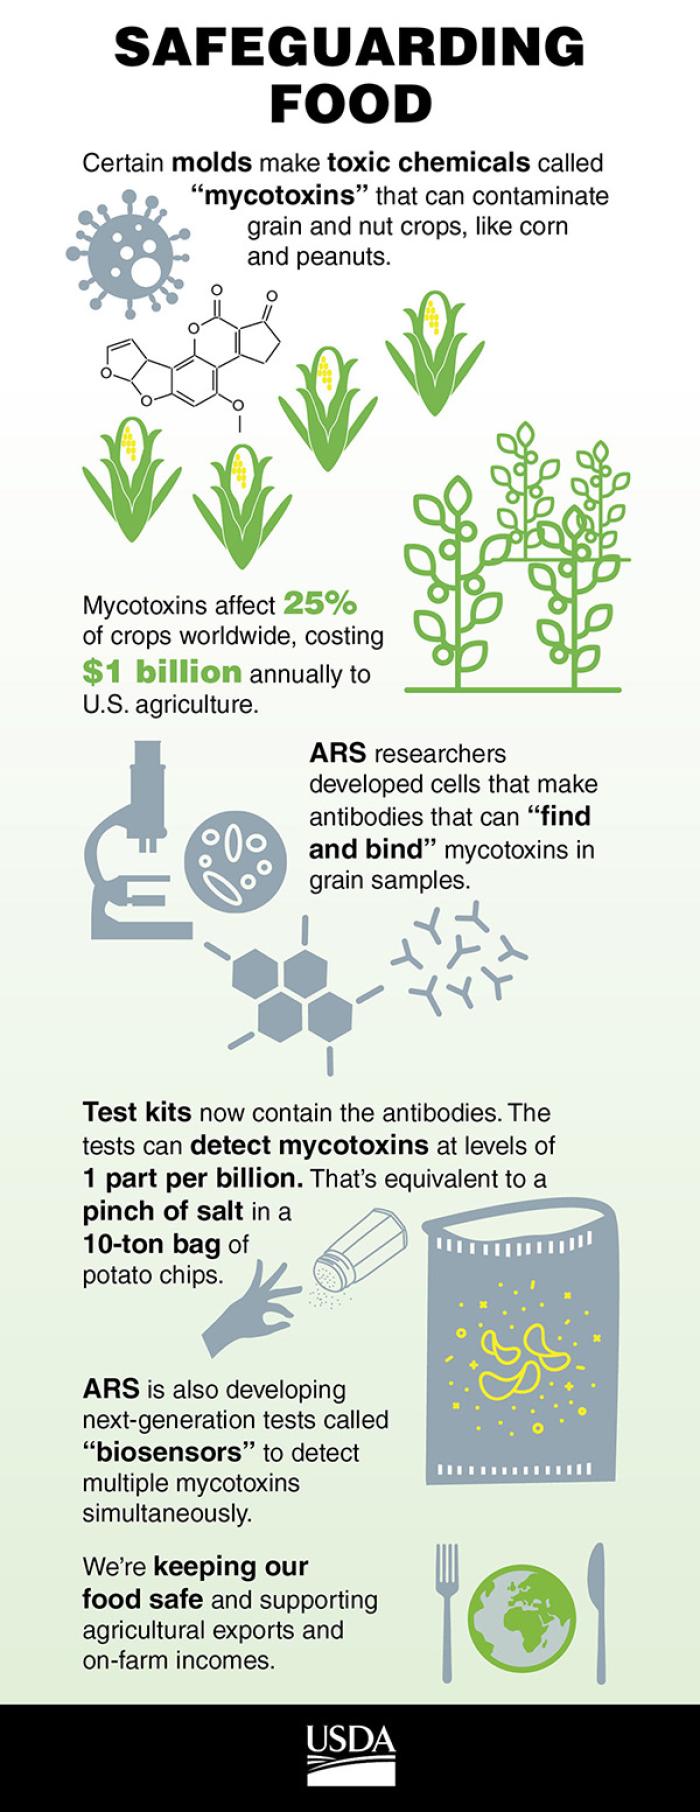 Infographic Text
Certain molds make toxic chemicals called “mycotoxins” that can contaminate grain and nuts crops, like corn and peanuts. Mycotoxins affect 25% of crops worldwide, costing $1 billion annually to U.S. agriculture.
ARS researchers developed cells that make antibodies that can “find and bind” mycotoxins in grain samples. Test kits now contain the antibodies.
The tests can detect mycotoxins at levels of 1 part per billion. That’s equivalent to a pinch of salt in a 10-ton bag of potato 